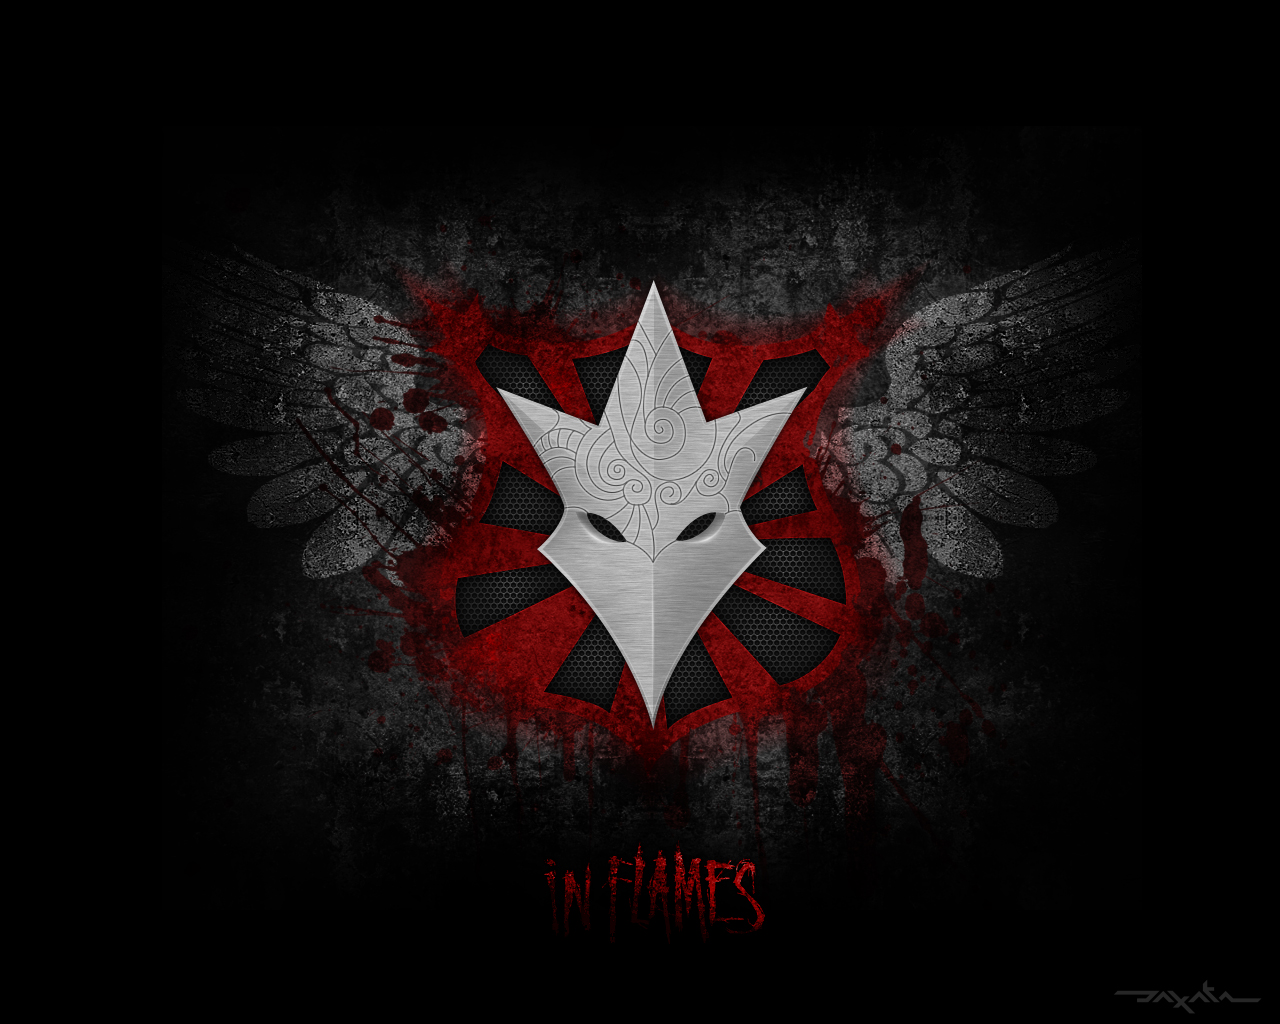 In Flames Logo Wallpaper by DaXaka163 on